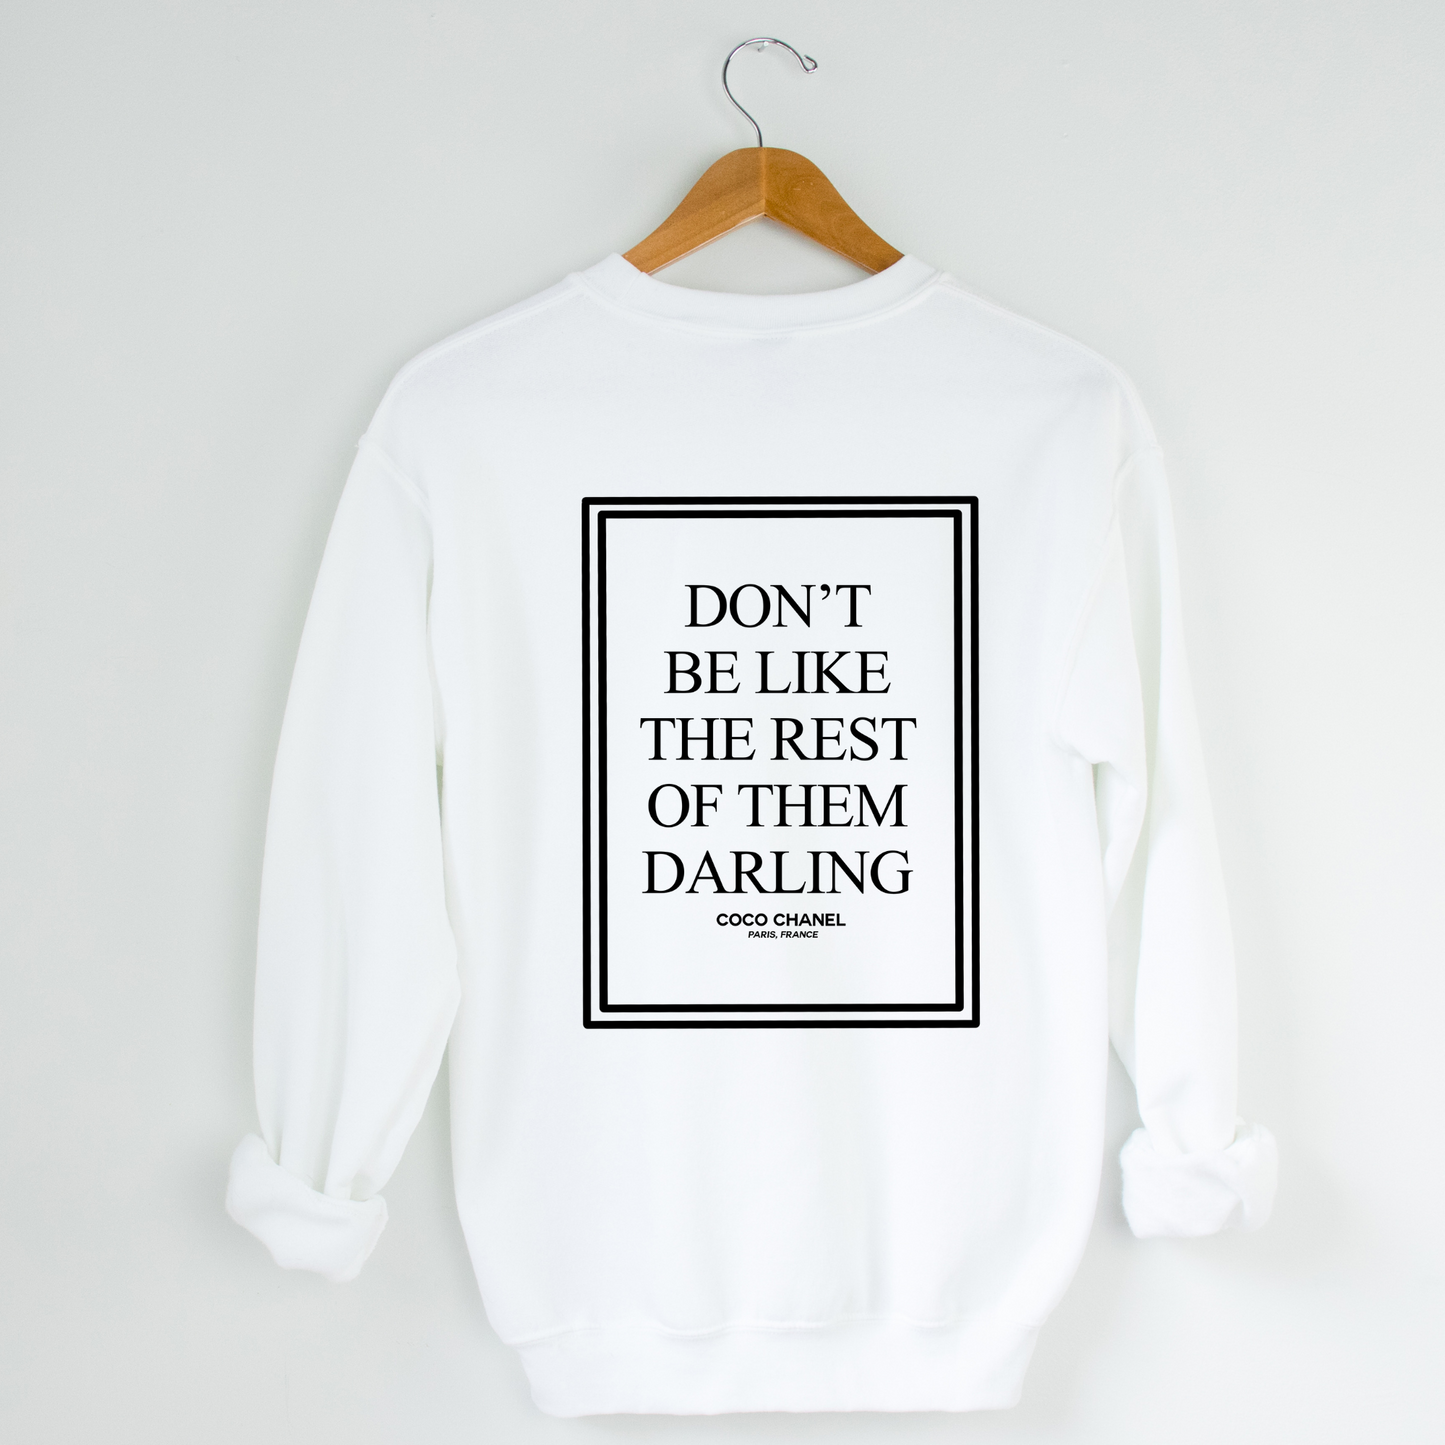 "Don't Be Like The Rest Of Them" Graphic Sweater